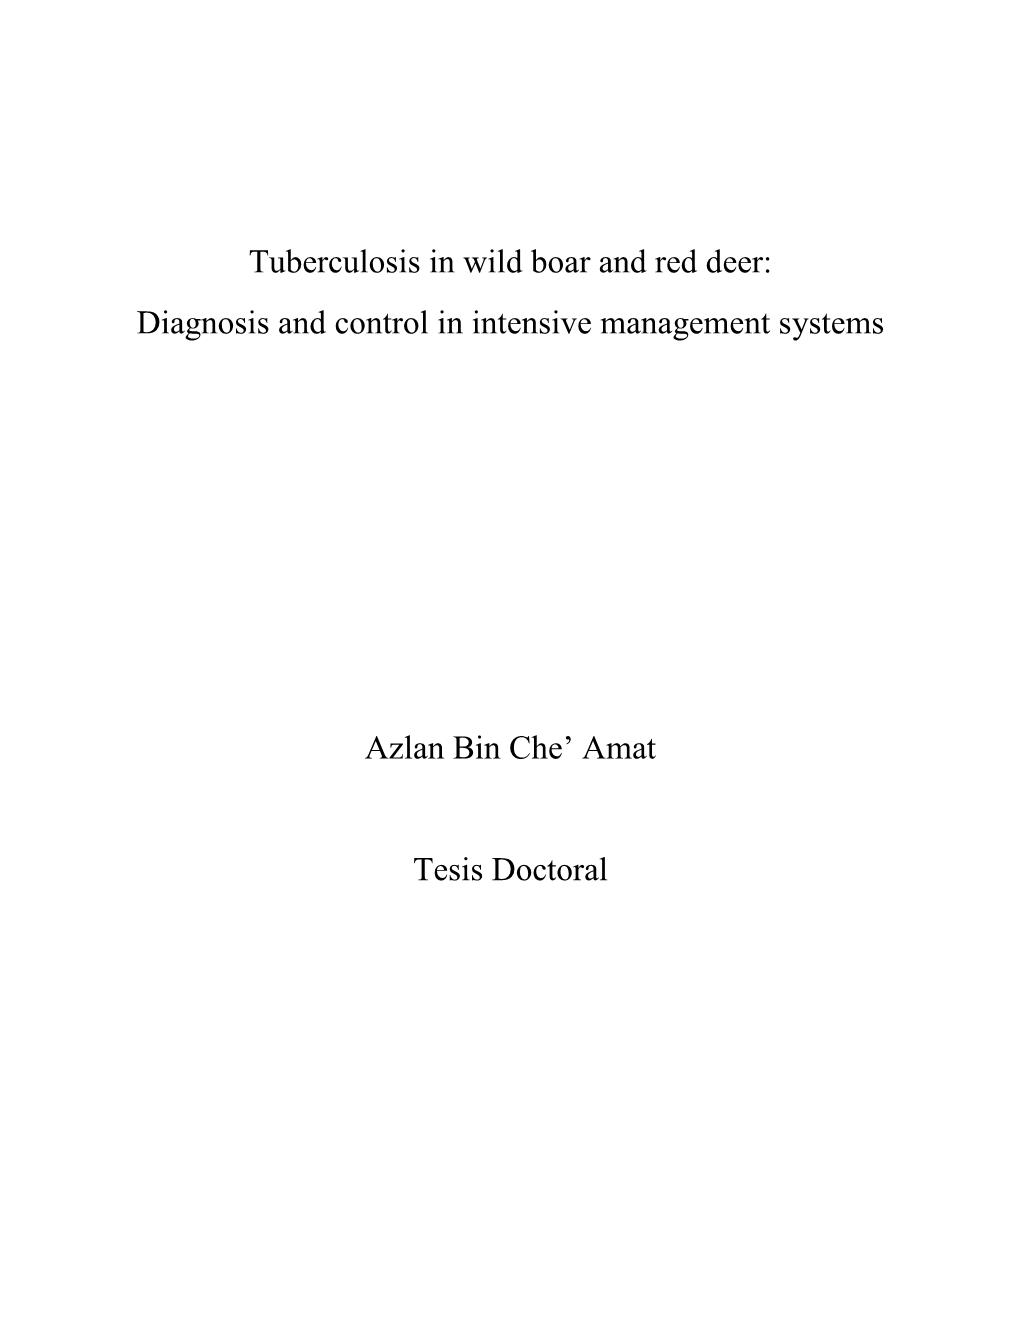 Tuberculosis in Wild Boar and Red Deer: Diagnosis and Control in Intensive Management Systems